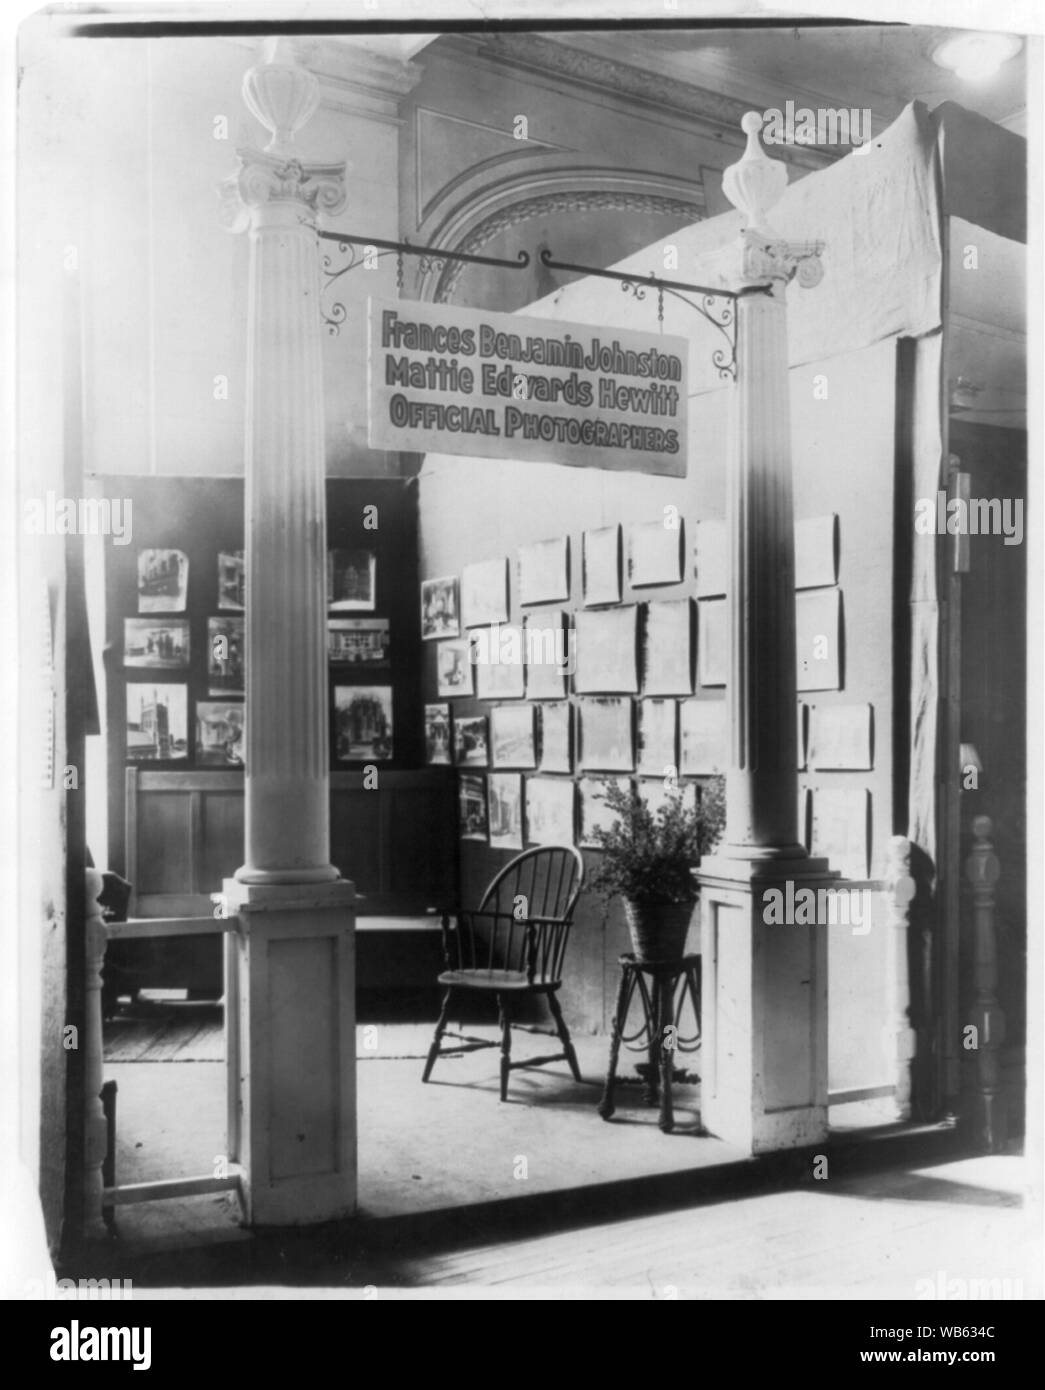 Exhibit display area for architectural photographs by Frances Benjamin Johnston, Mattie Edwards Hewitt, Official Photographers Abstract/medium: 1 photographic print. Stock Photo